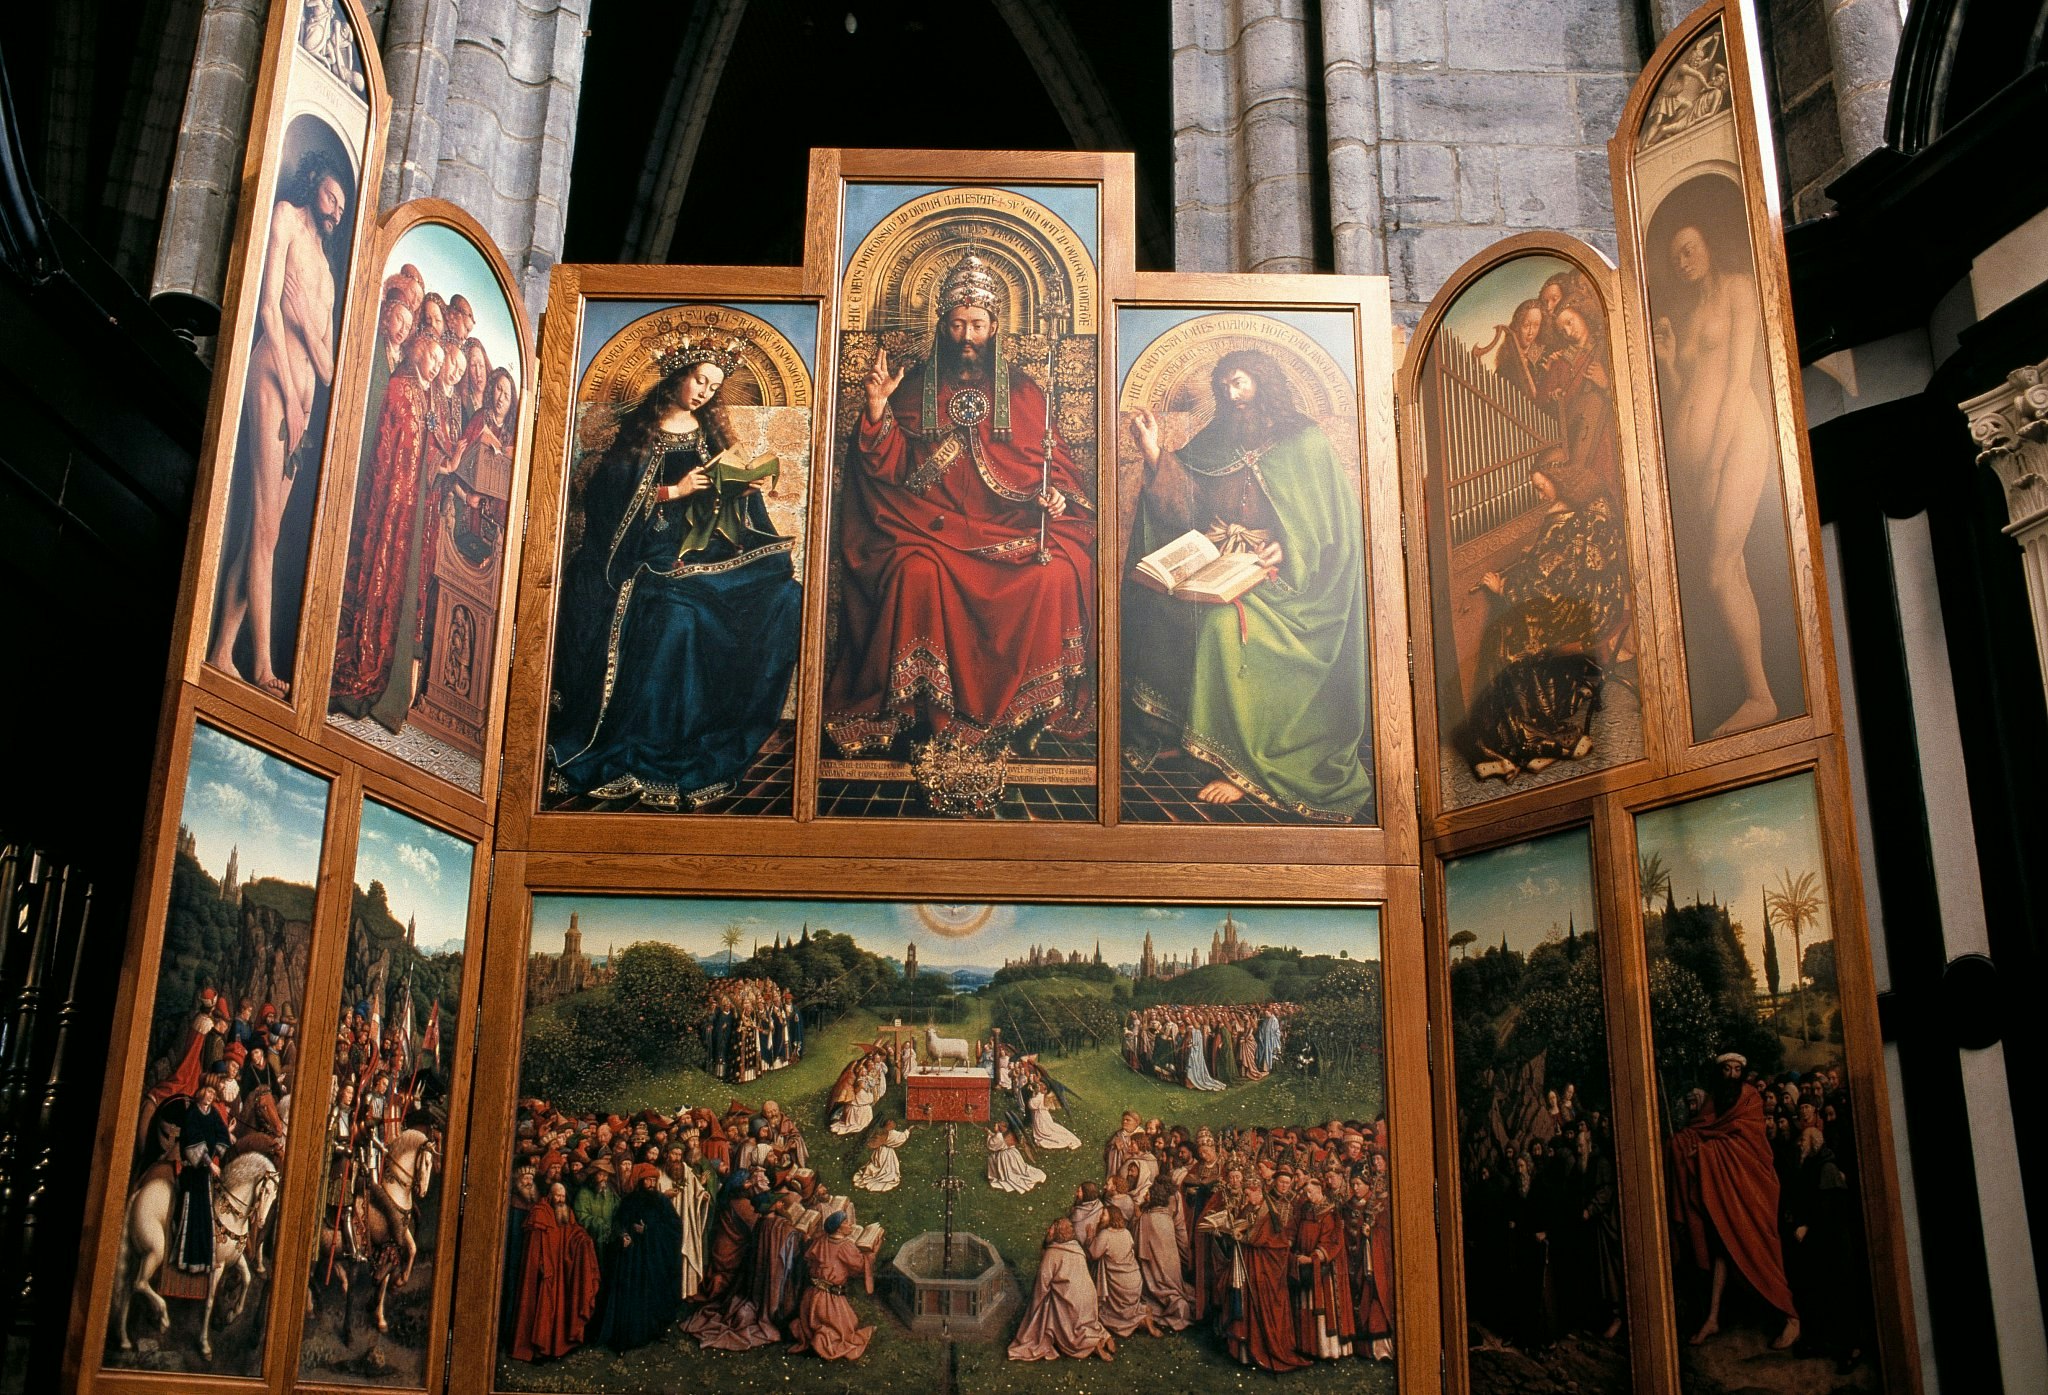 The Ghent Altarpiece, an enormous painting with a large central section and on either side two “wing” sections on hinges, on display in St Bavo Cathedral.